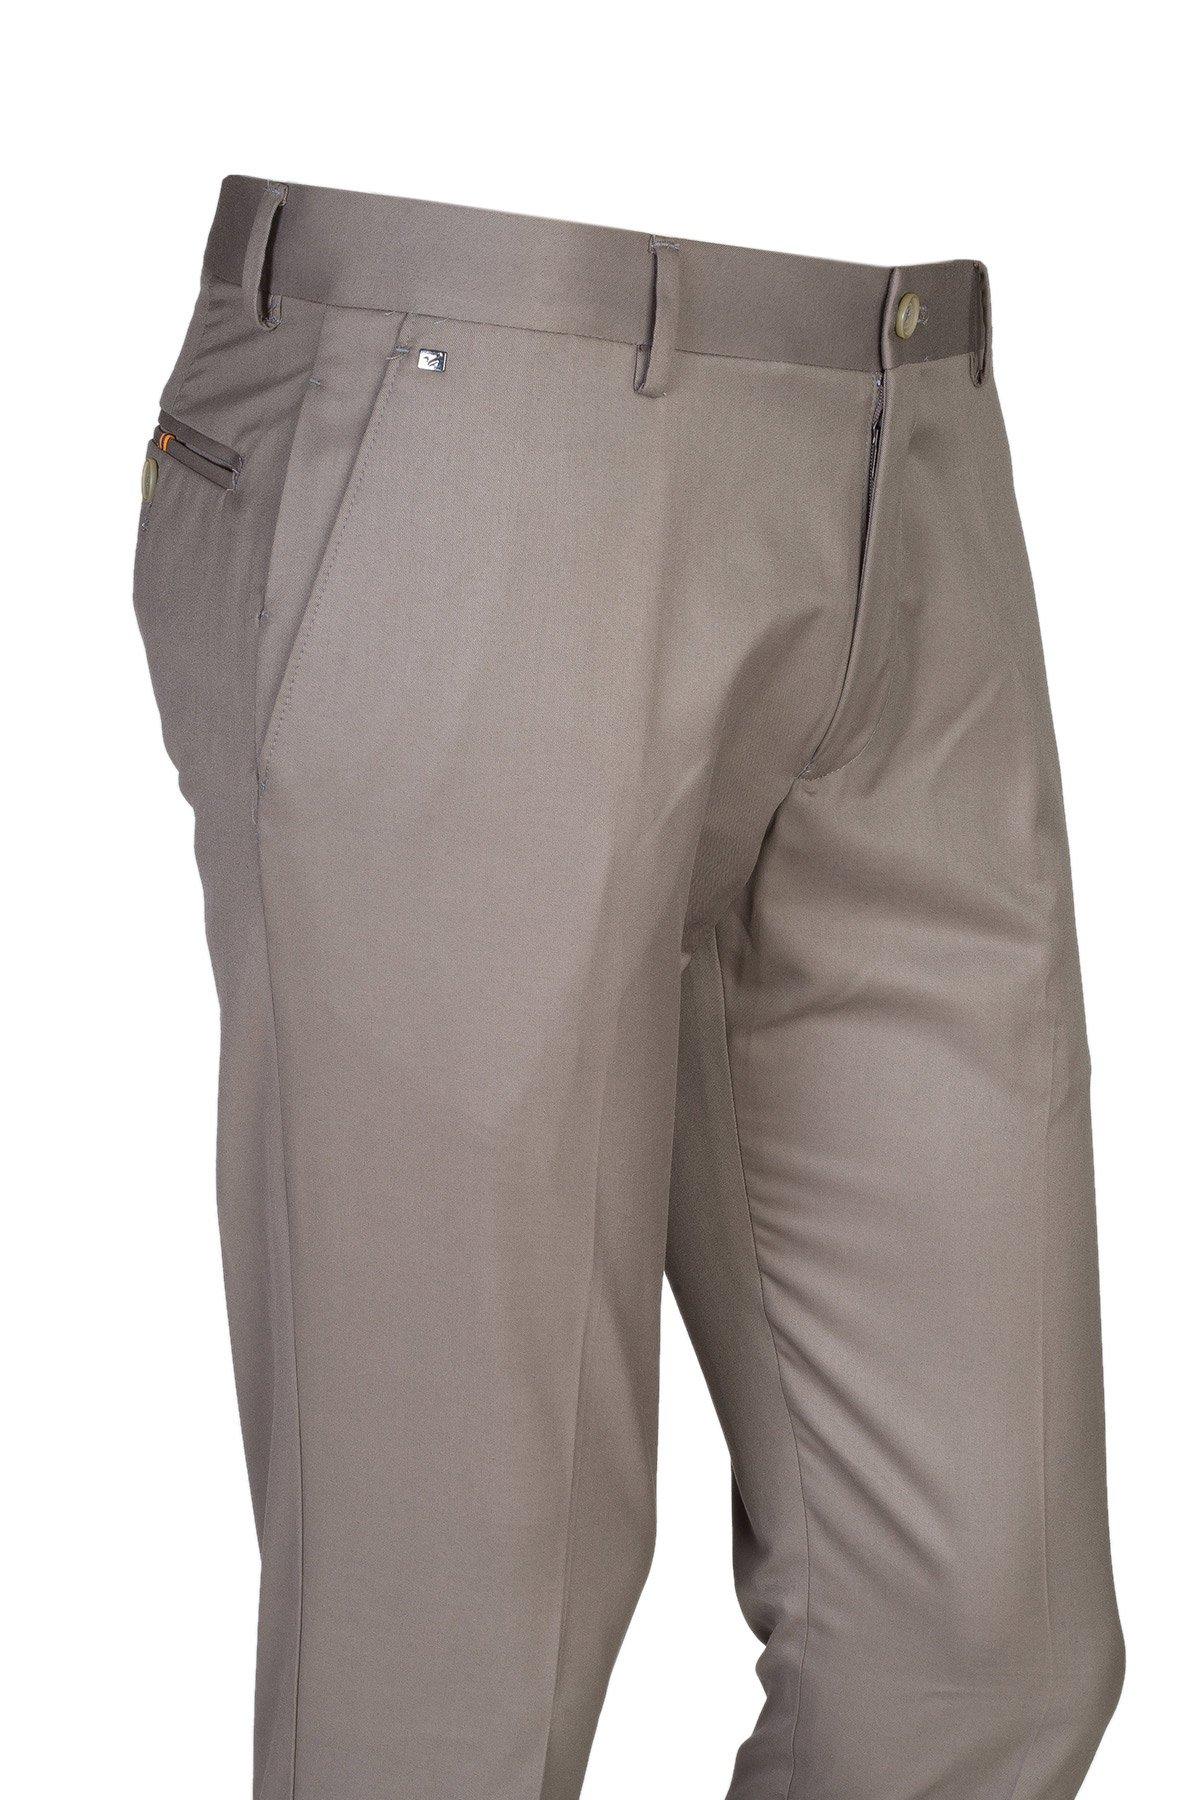 Non-Pleated Plain Ready Made Trousers